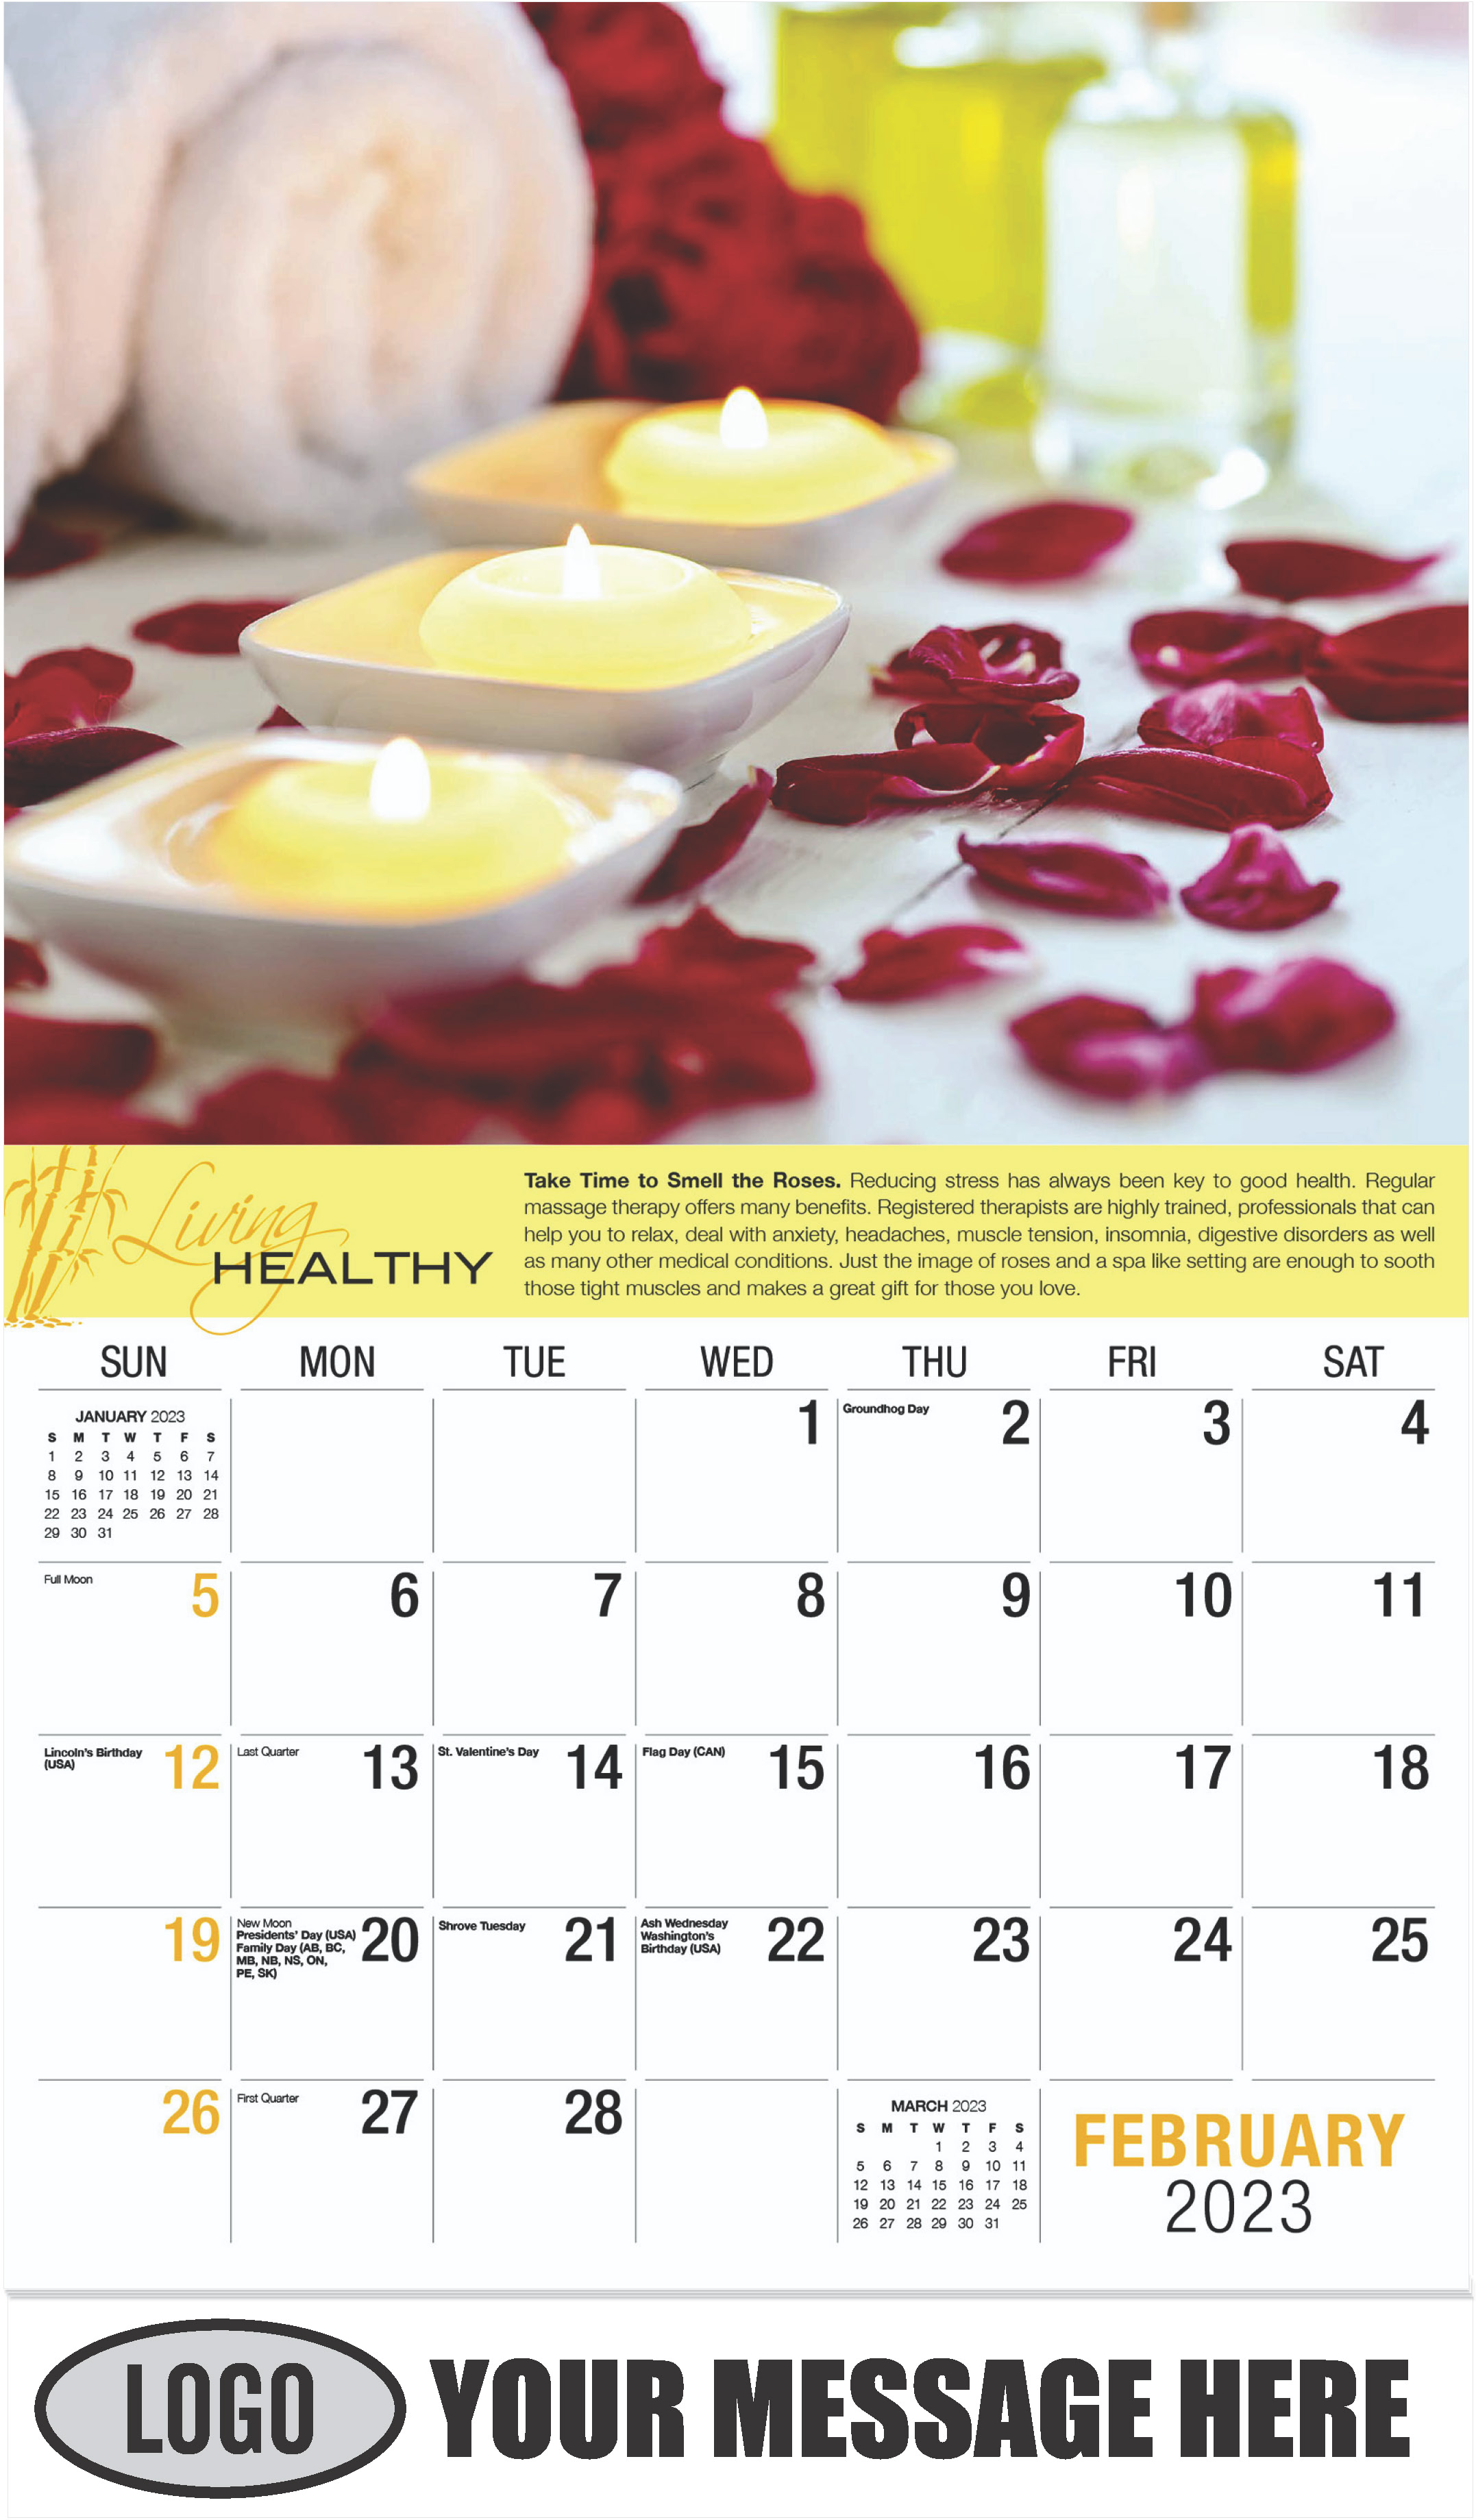 Aromatherapy Oil - February - Living Healthy 2023 Promotional Calendar